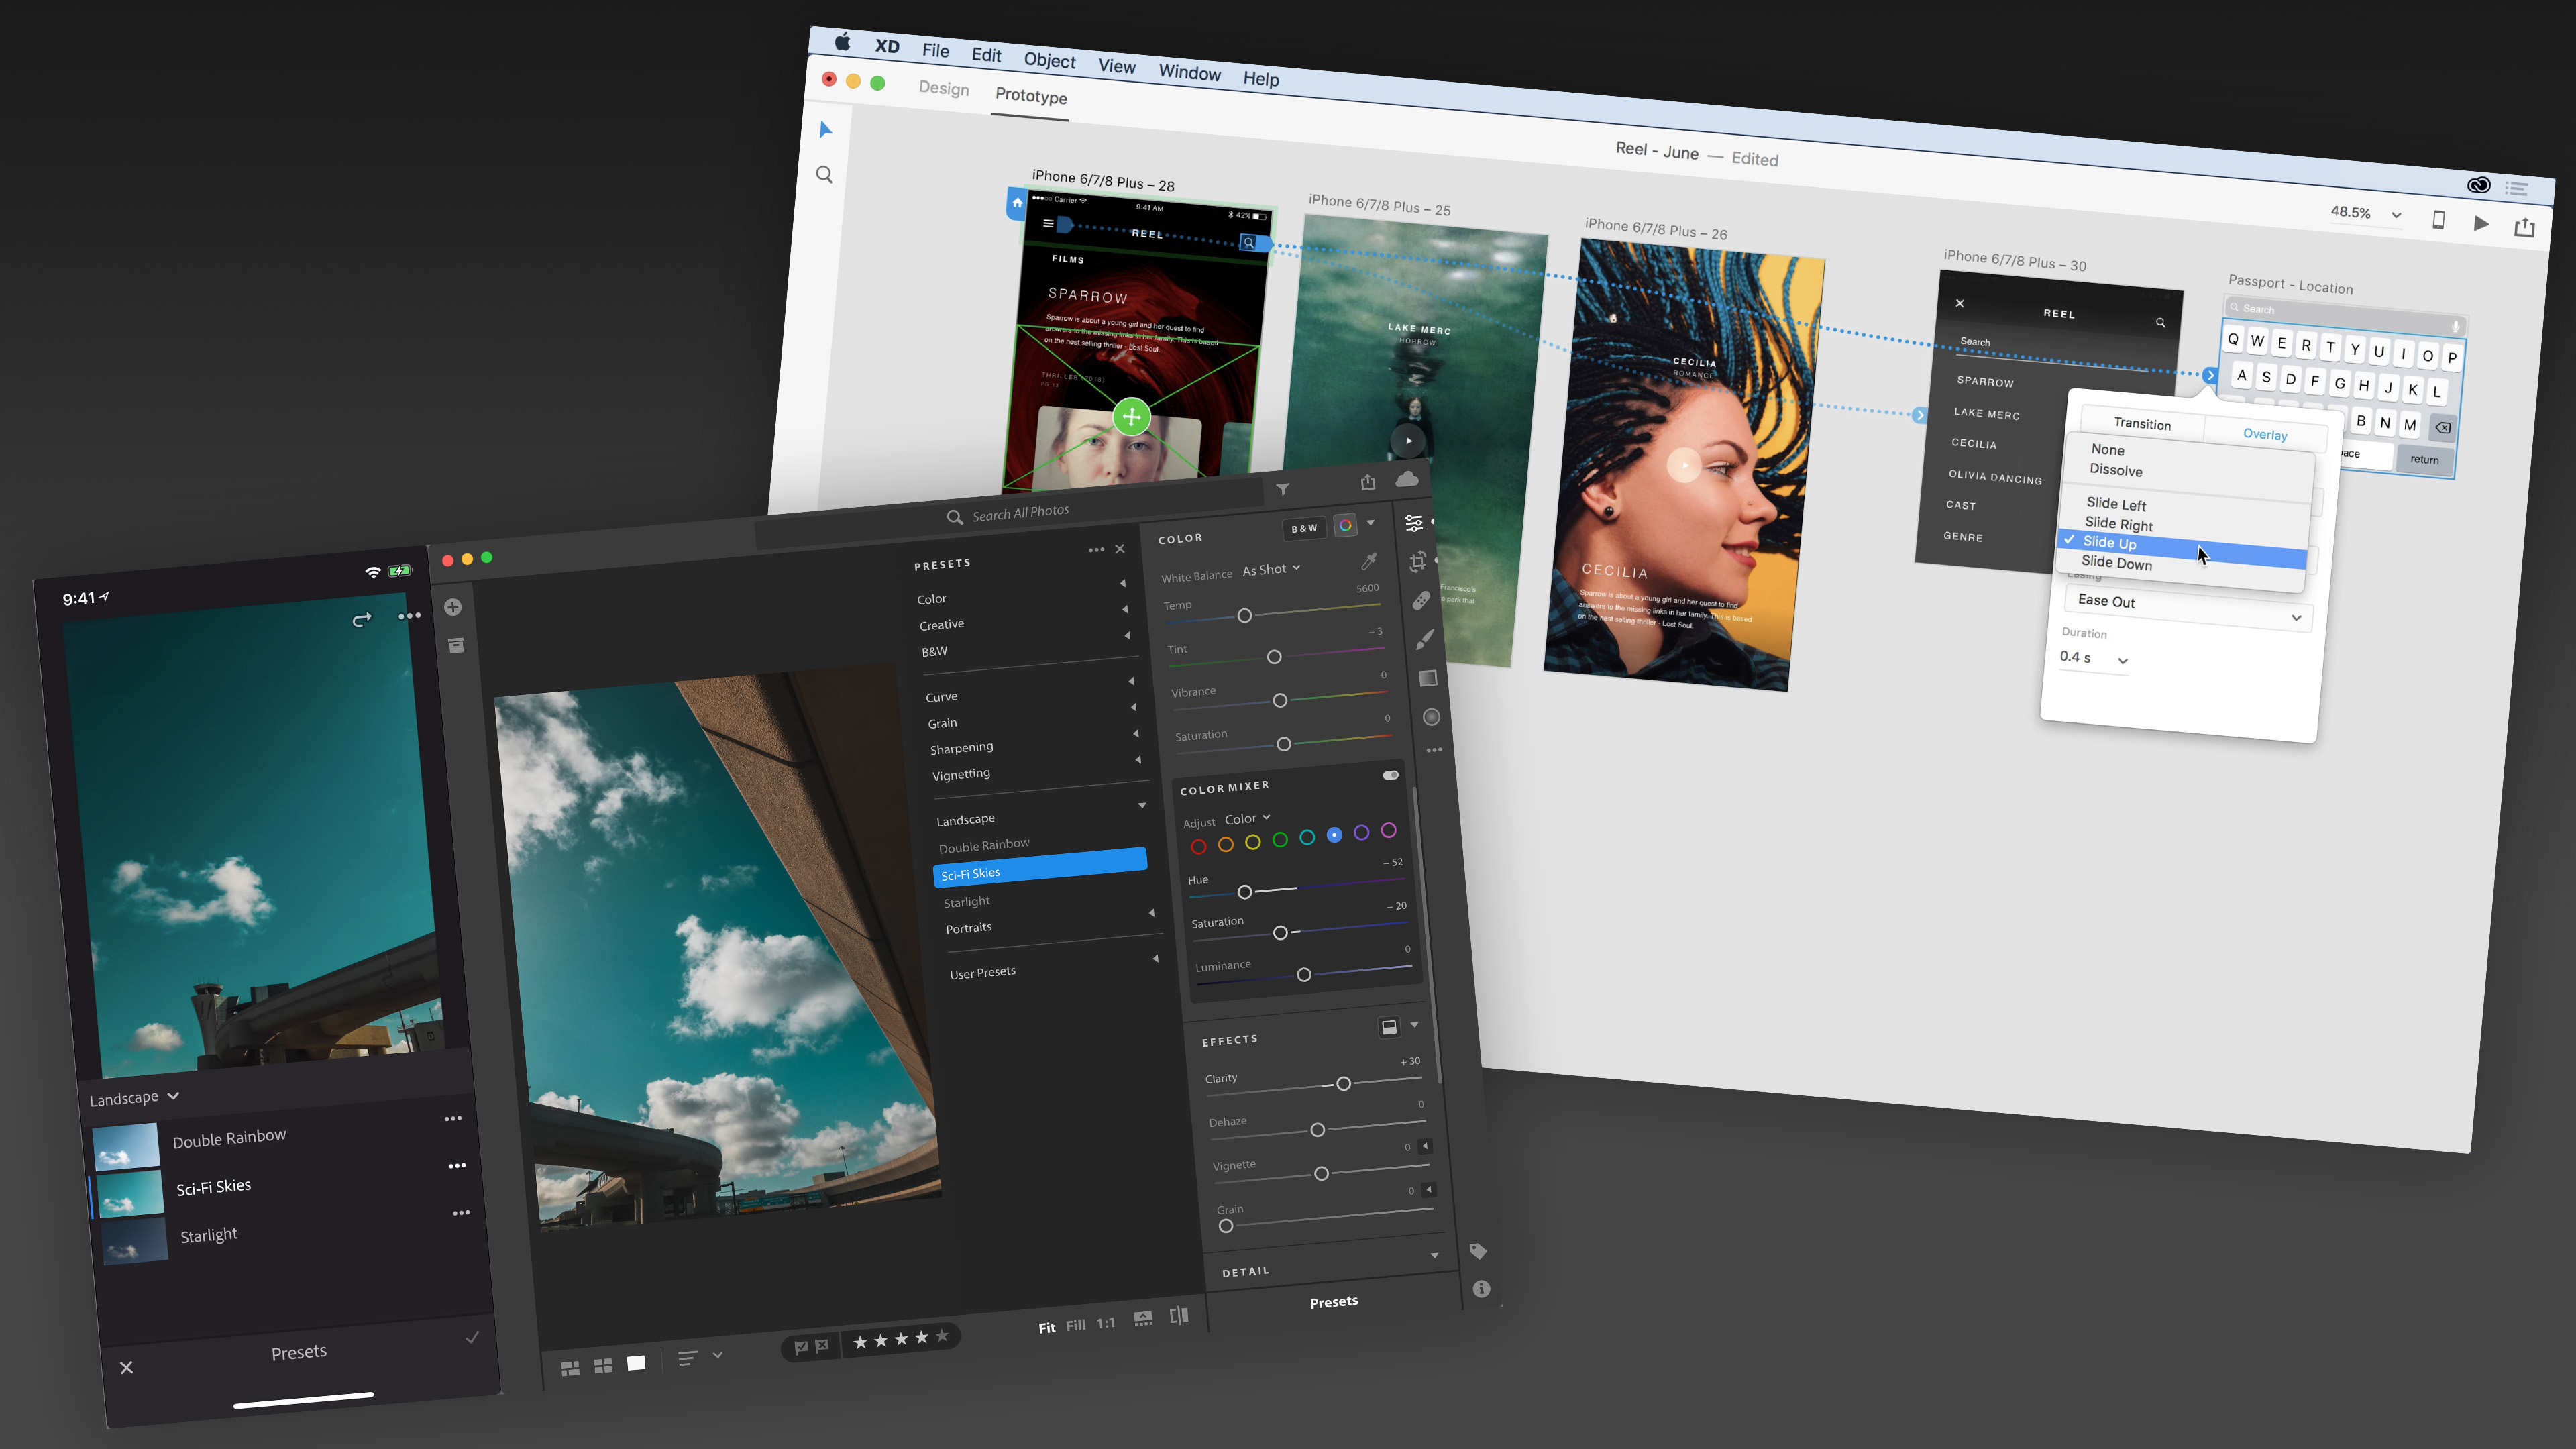 how to download adobe cc on mac